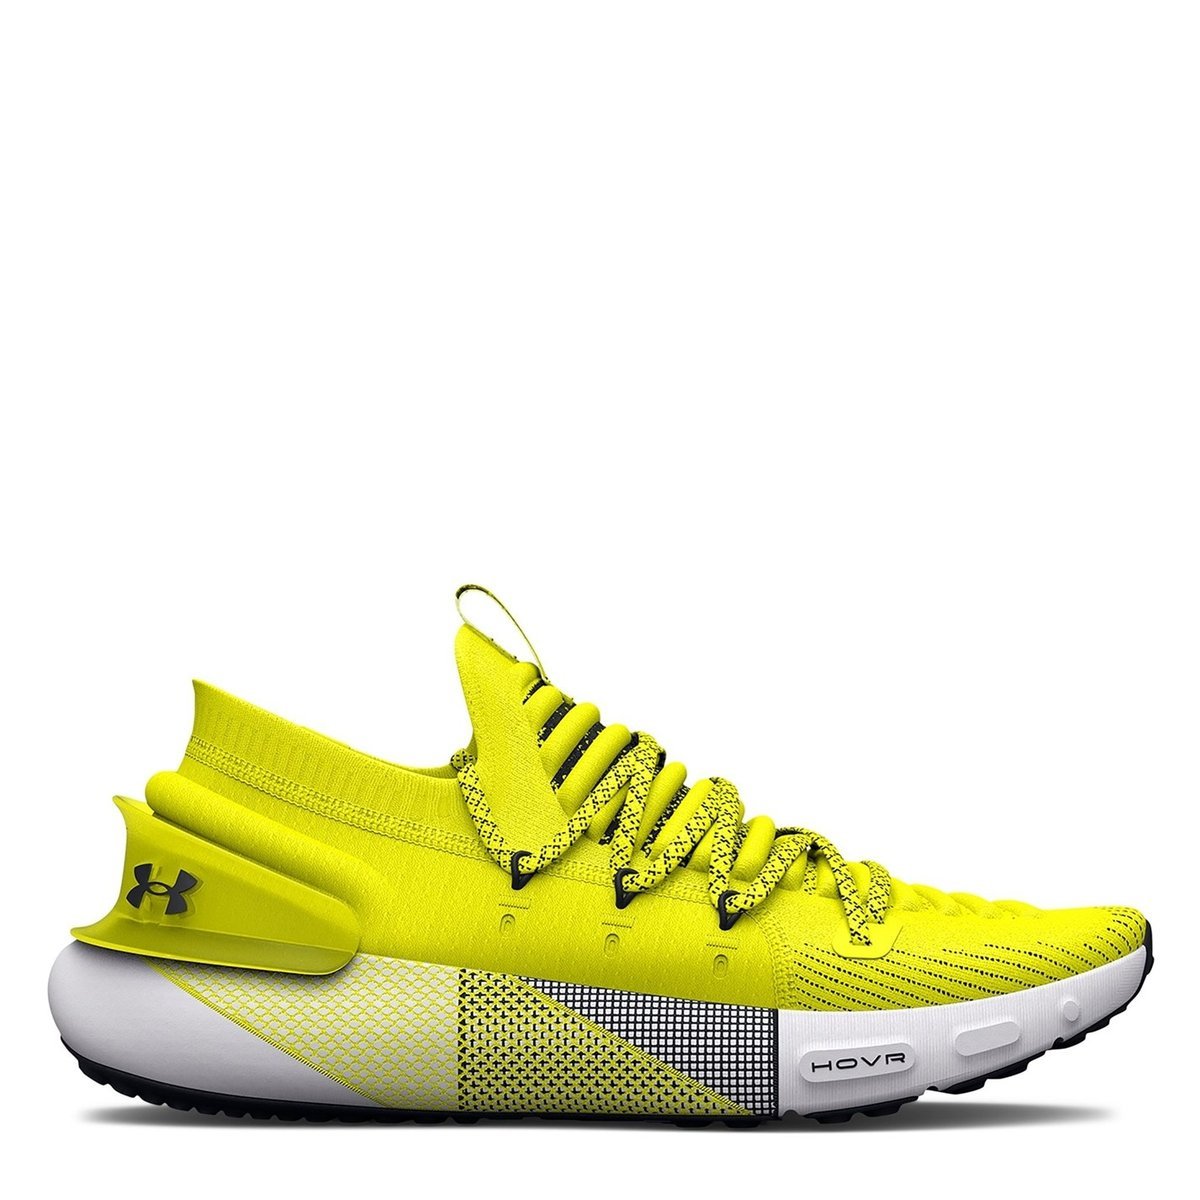 Under Armour, Gs Project Rock 3 99, Yellow